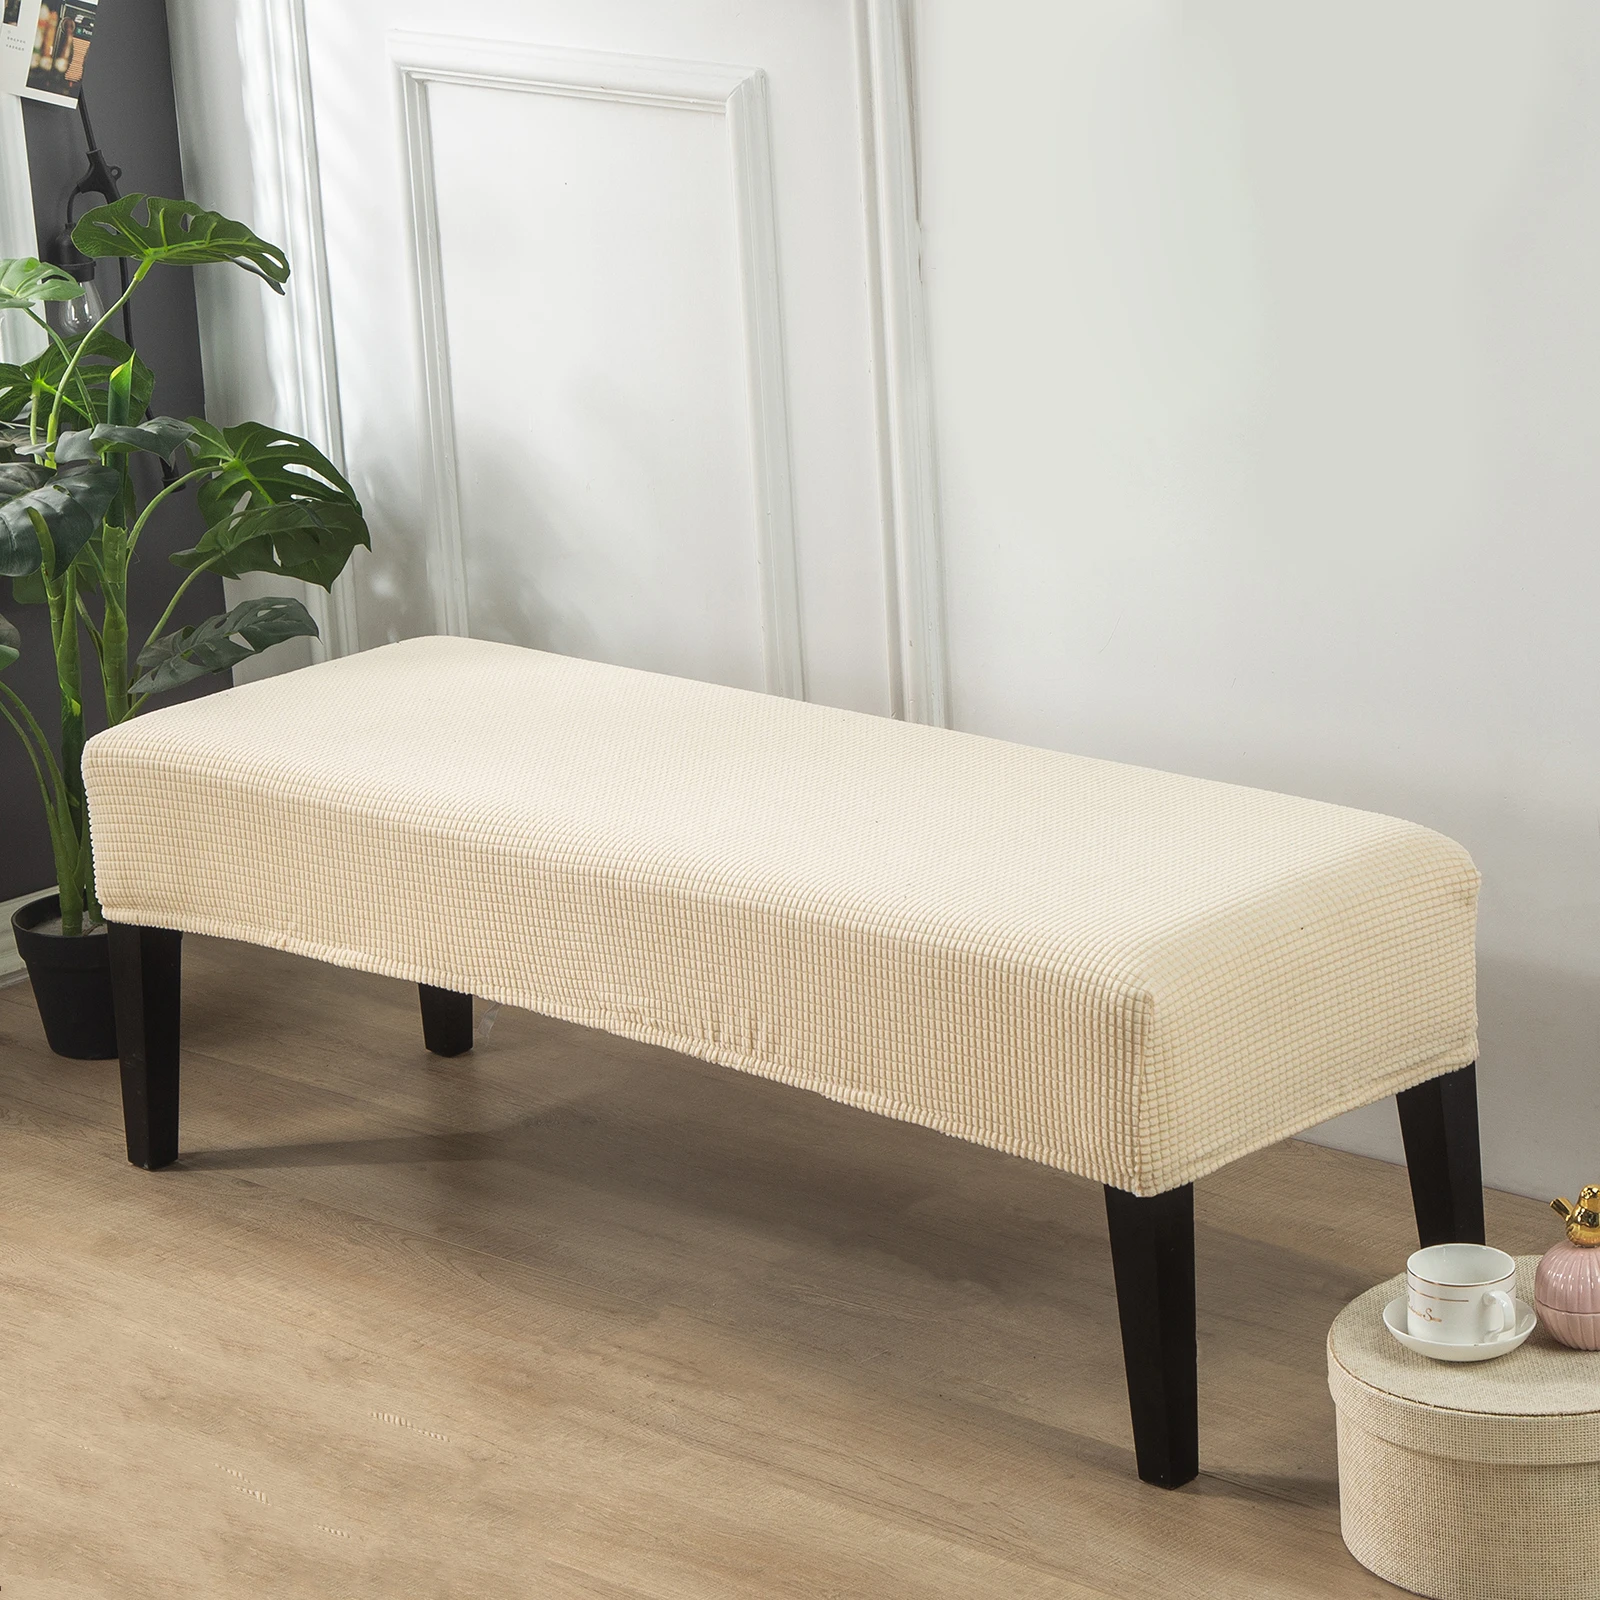 Polyester Jacquard Fabric Bench Cover Bench Slipcover, Easy Install